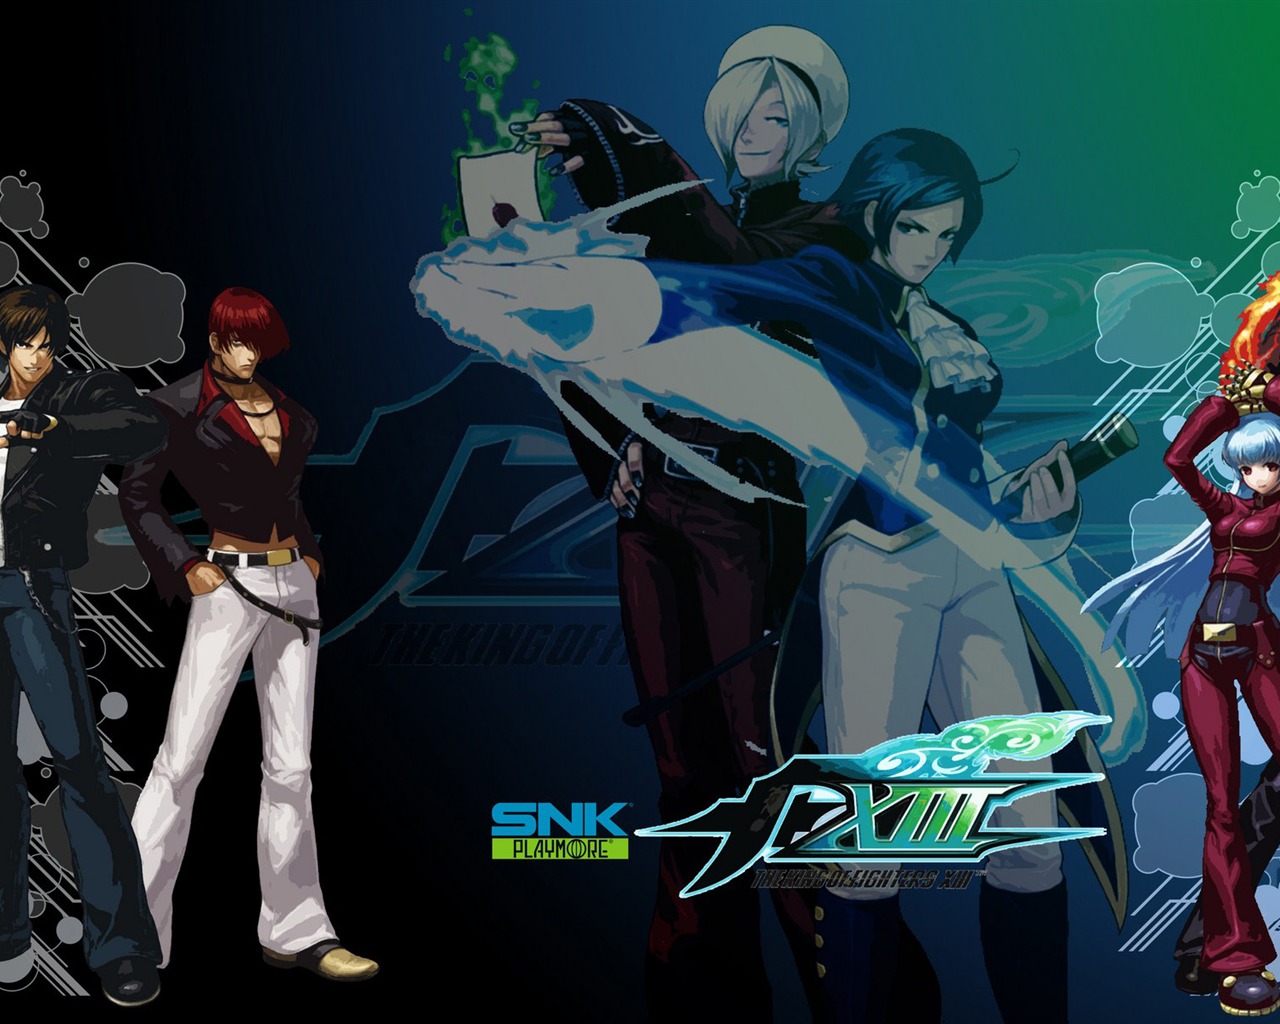 Le roi de wallpapers Fighters XIII #4 - 1280x1024